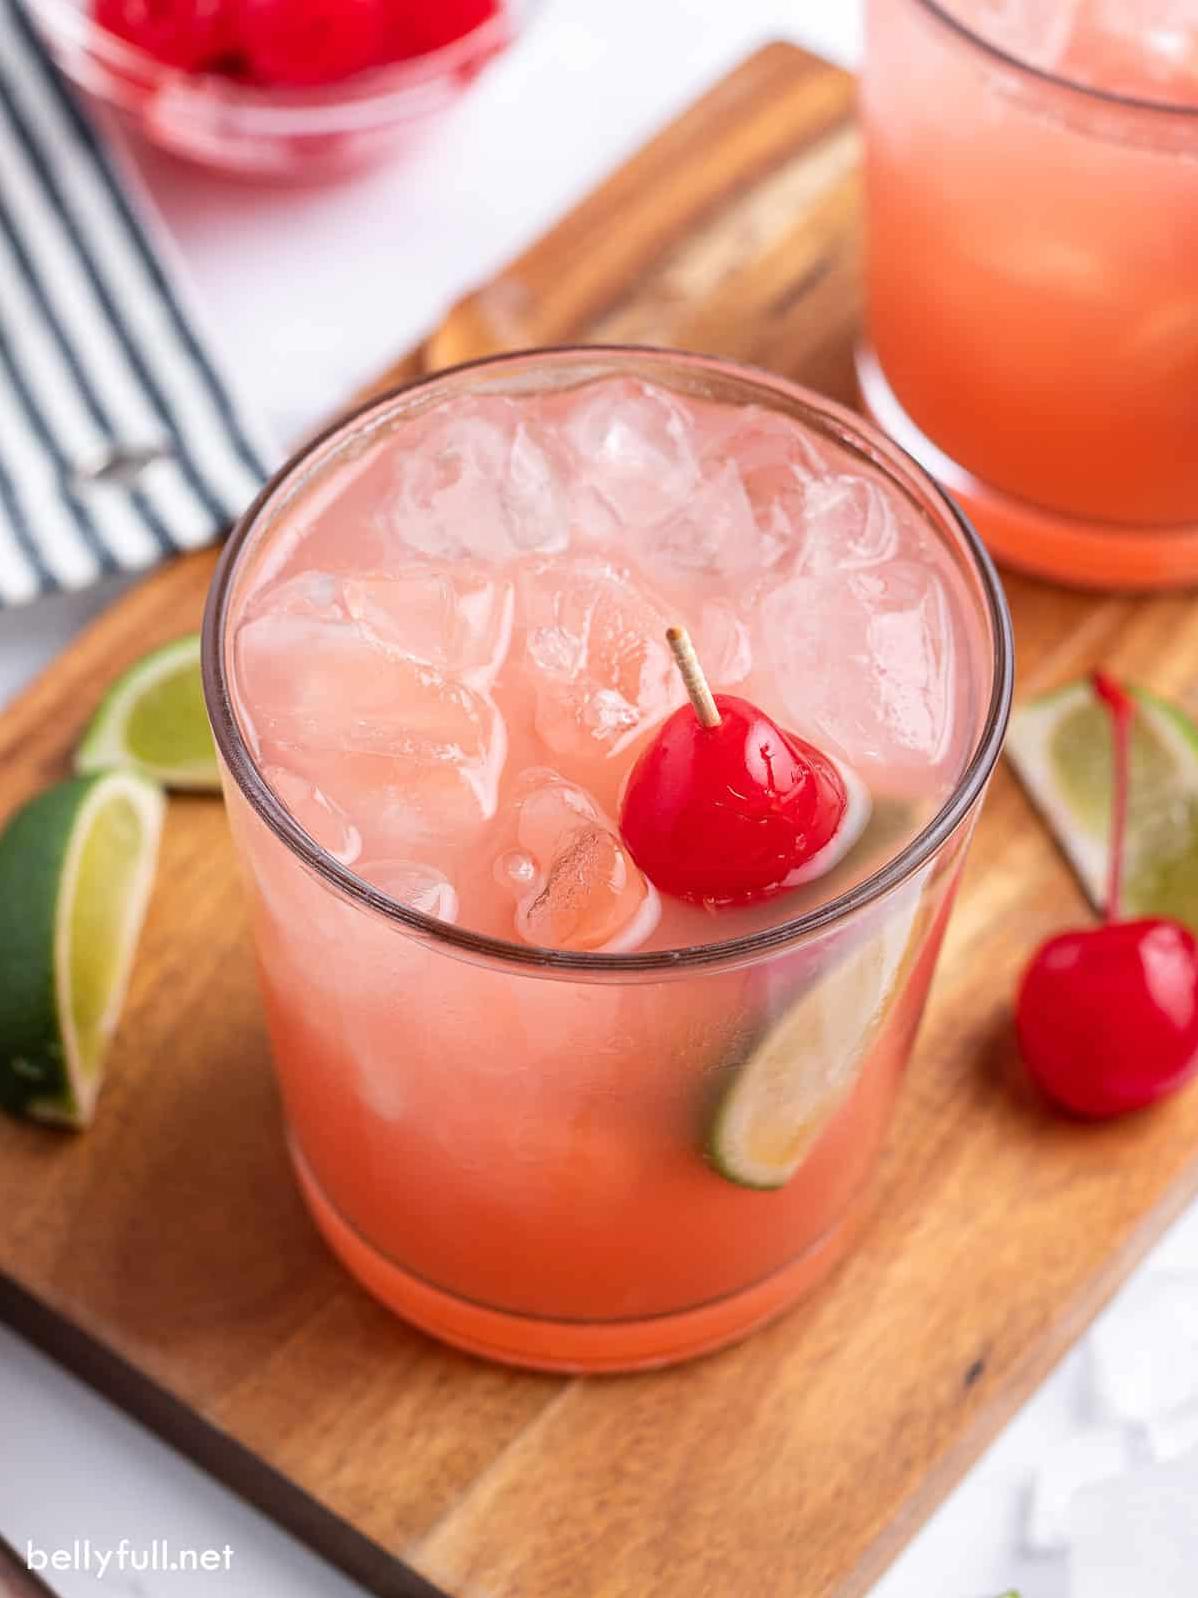  The vibrant colors of the cherry and lime make this a perfect summertime drink for any occasion.